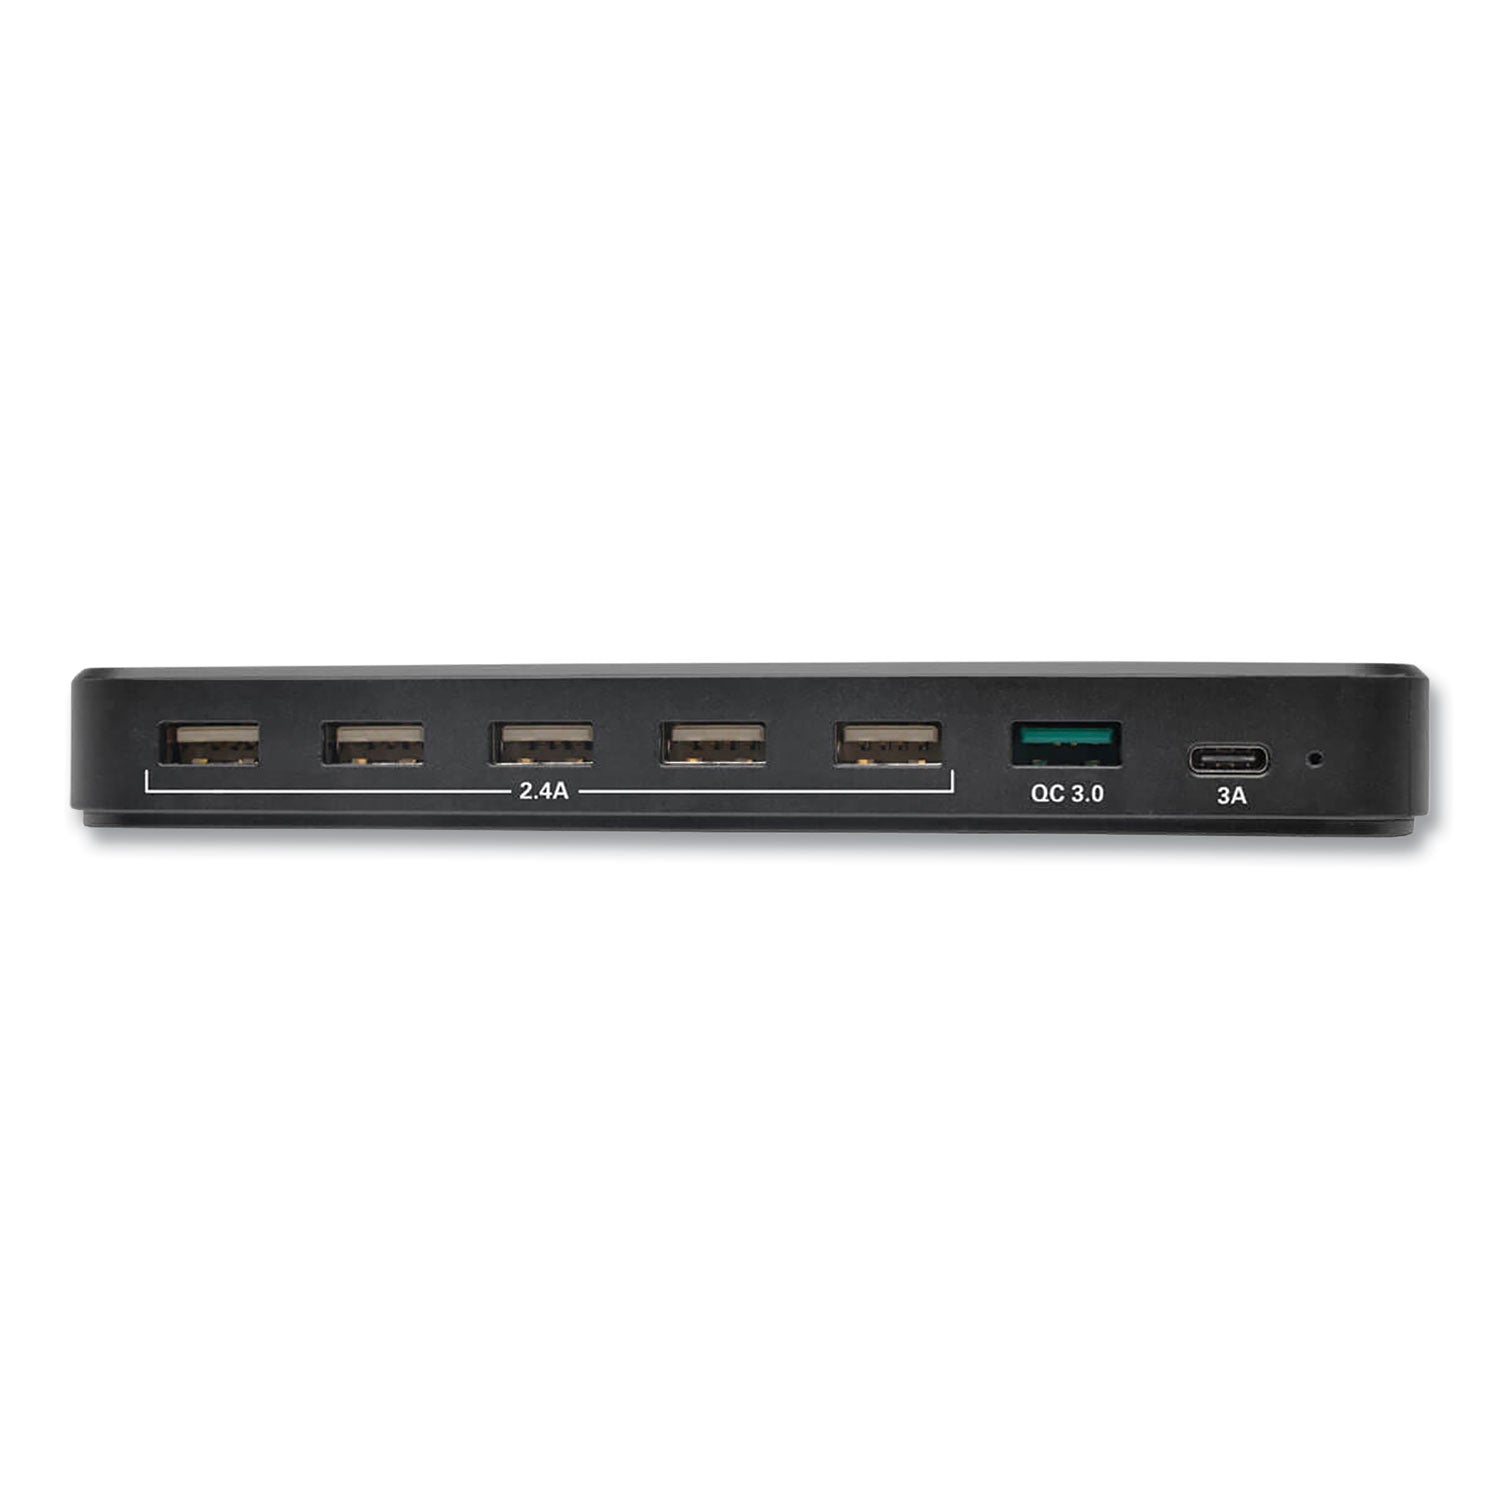 usb-charging-station-with-quick-charge-30-7-devices-49-x-26-x-66-black_trpu280007cqcst - 4